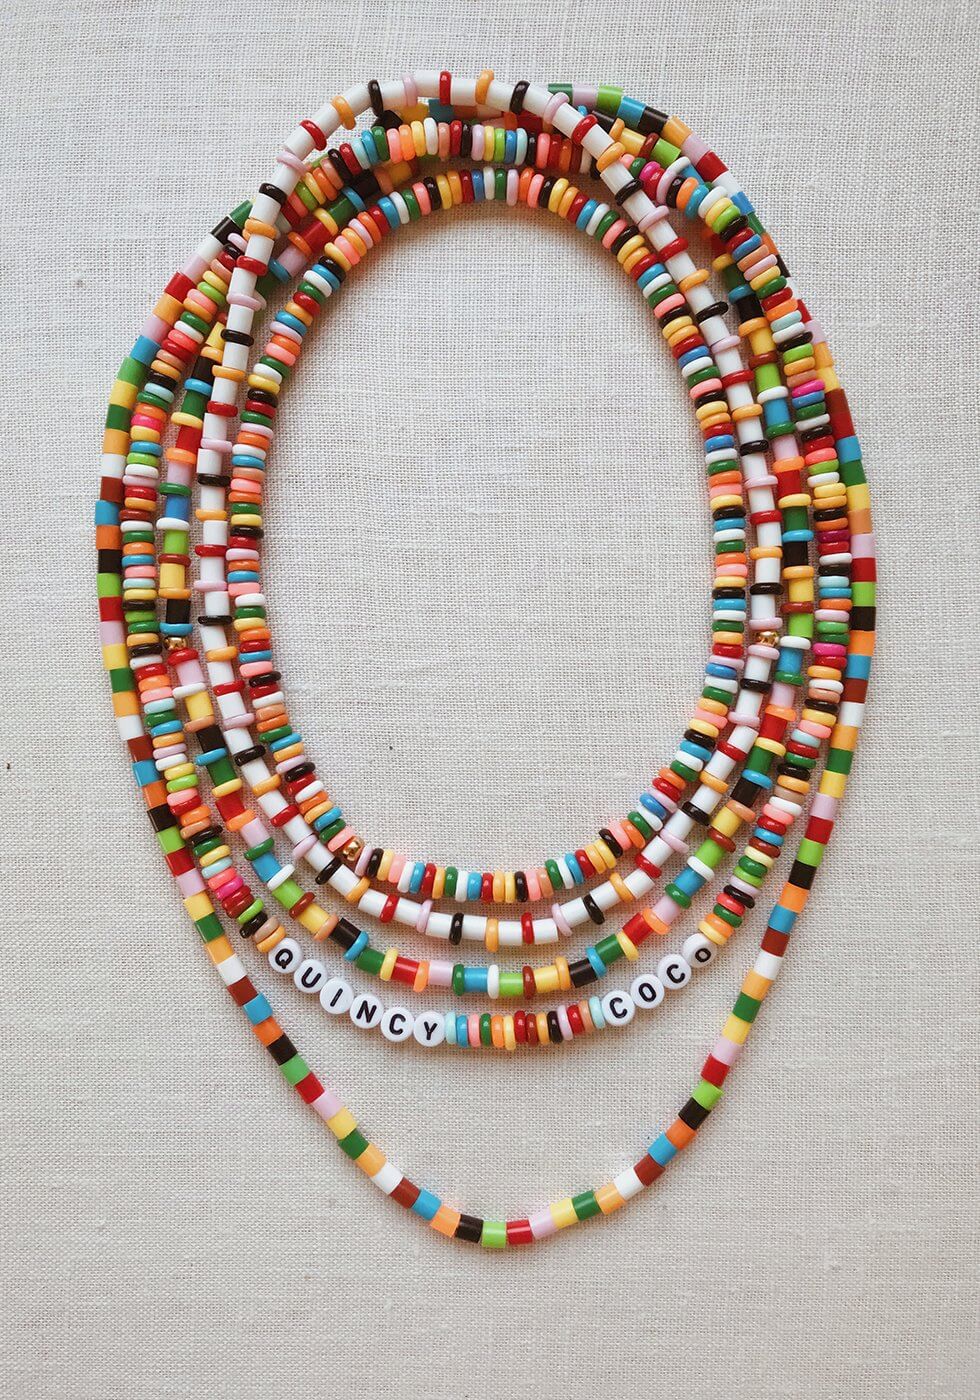 Gorgeous Perler Bead Jewelry Craft Using Letter Beads, Crimp Covers & Parchment Paper